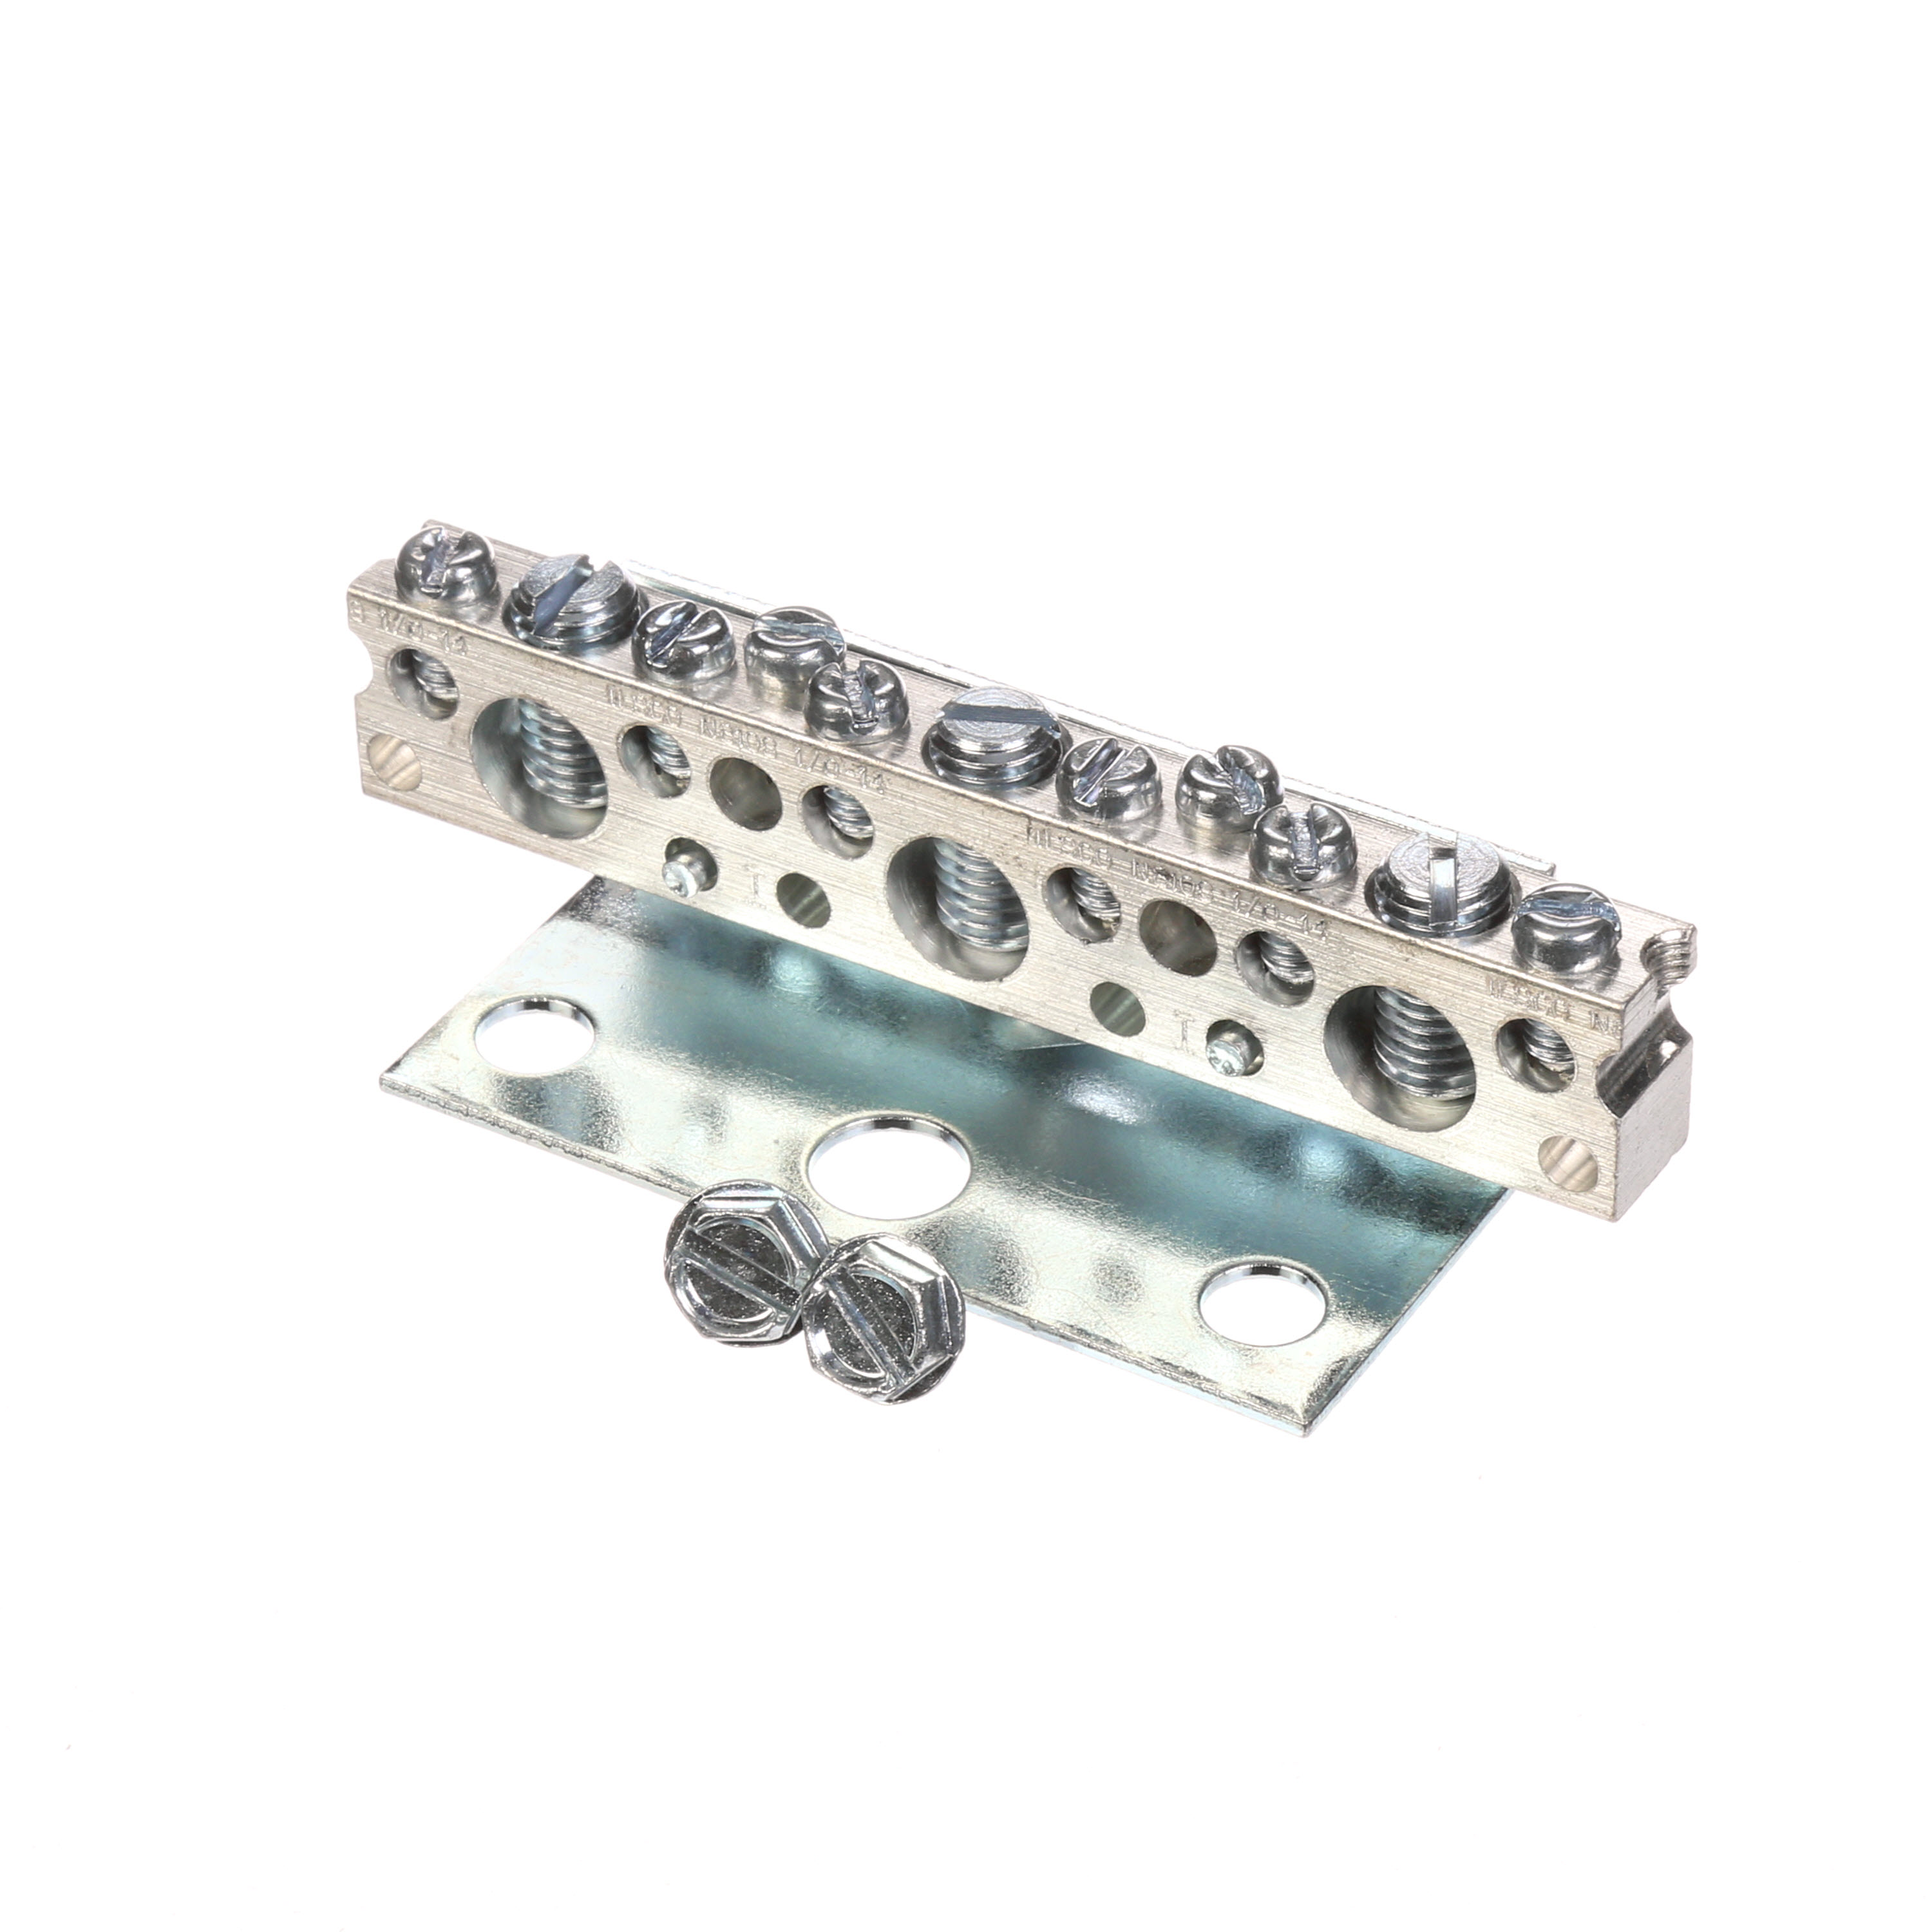 Siemens Low Voltage Residential Specialty Load Centers Miscellaneous Grounding bars (Al/Cu). Large connectors rated for (one 14-1/0, or 2-3 14-10), small connectors rated for (one 14-6 or two #14-12) length 3-1/2 IN. Connectors 8 small and3 large.